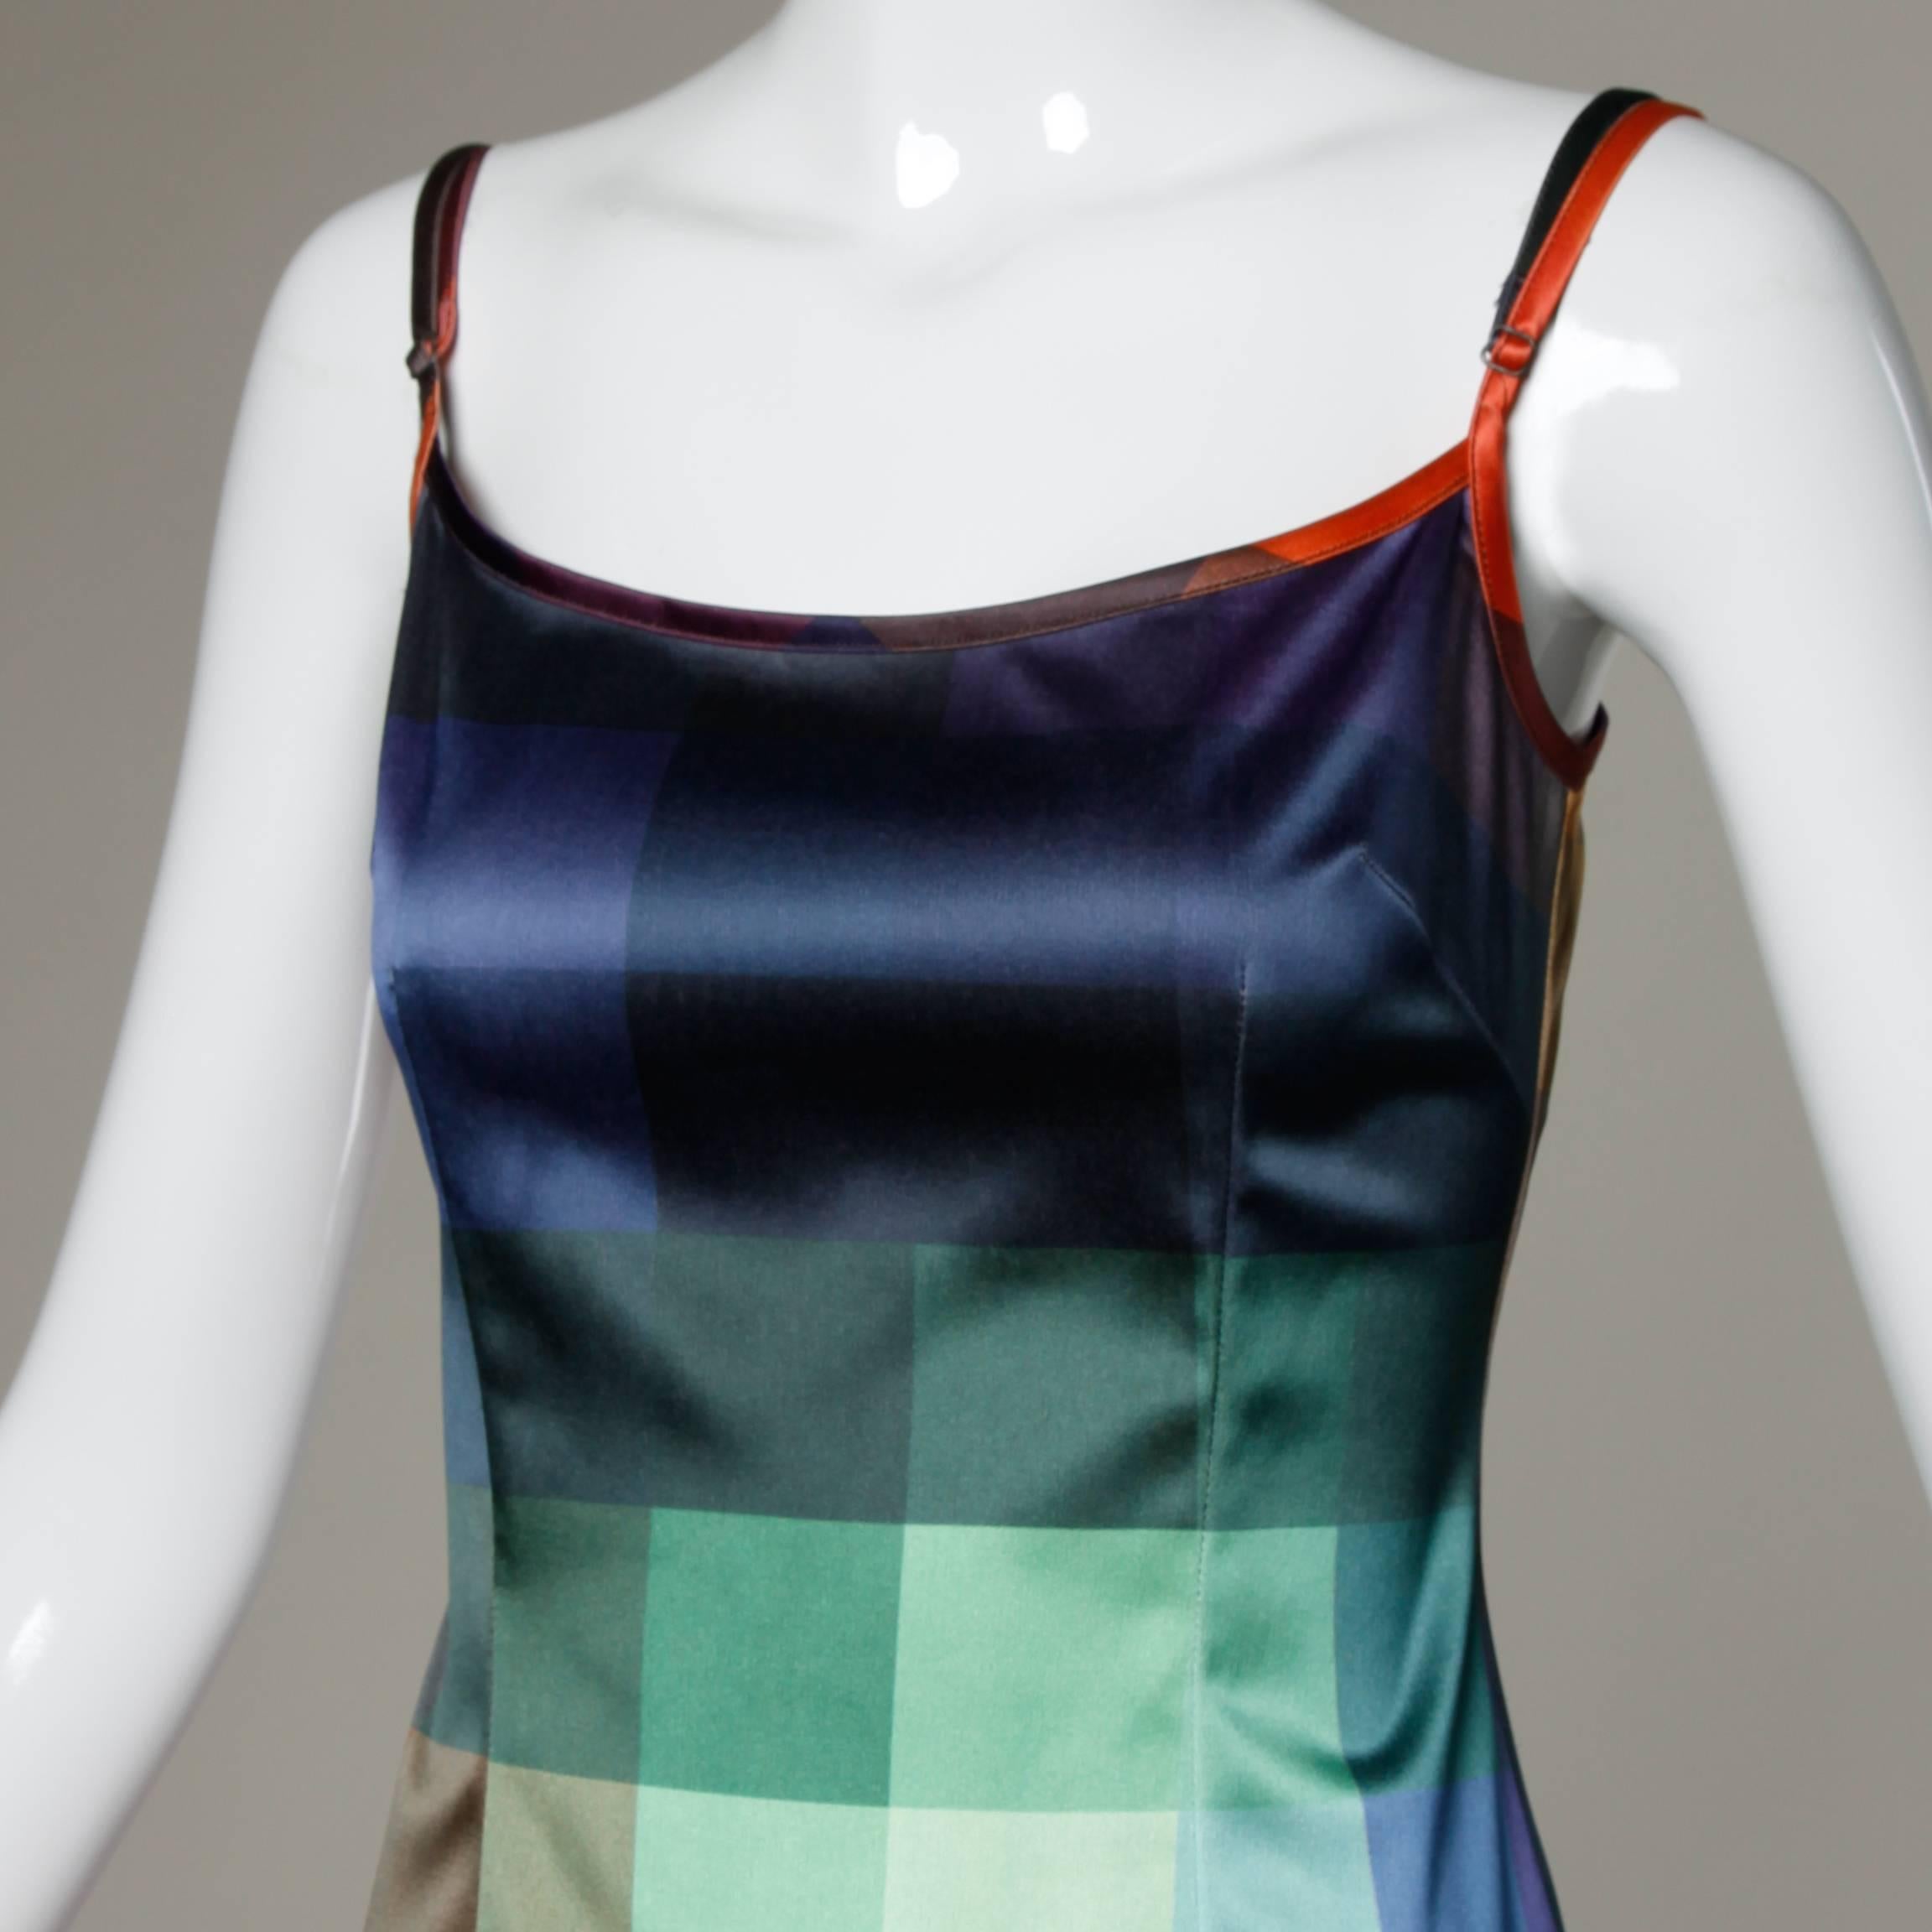 Fantastic vintage dress in checkered rainbow ombre by Moschino Jeans. 

Details:

Unlined
Back Zip and Hook Closure 
Marked Size: I 42/ USA 8/ F 38/ GB 12
Estimated Size: Small
Color: Multicolored 
Fabric: 95% Polyester/ 5% Elastic 
Label: